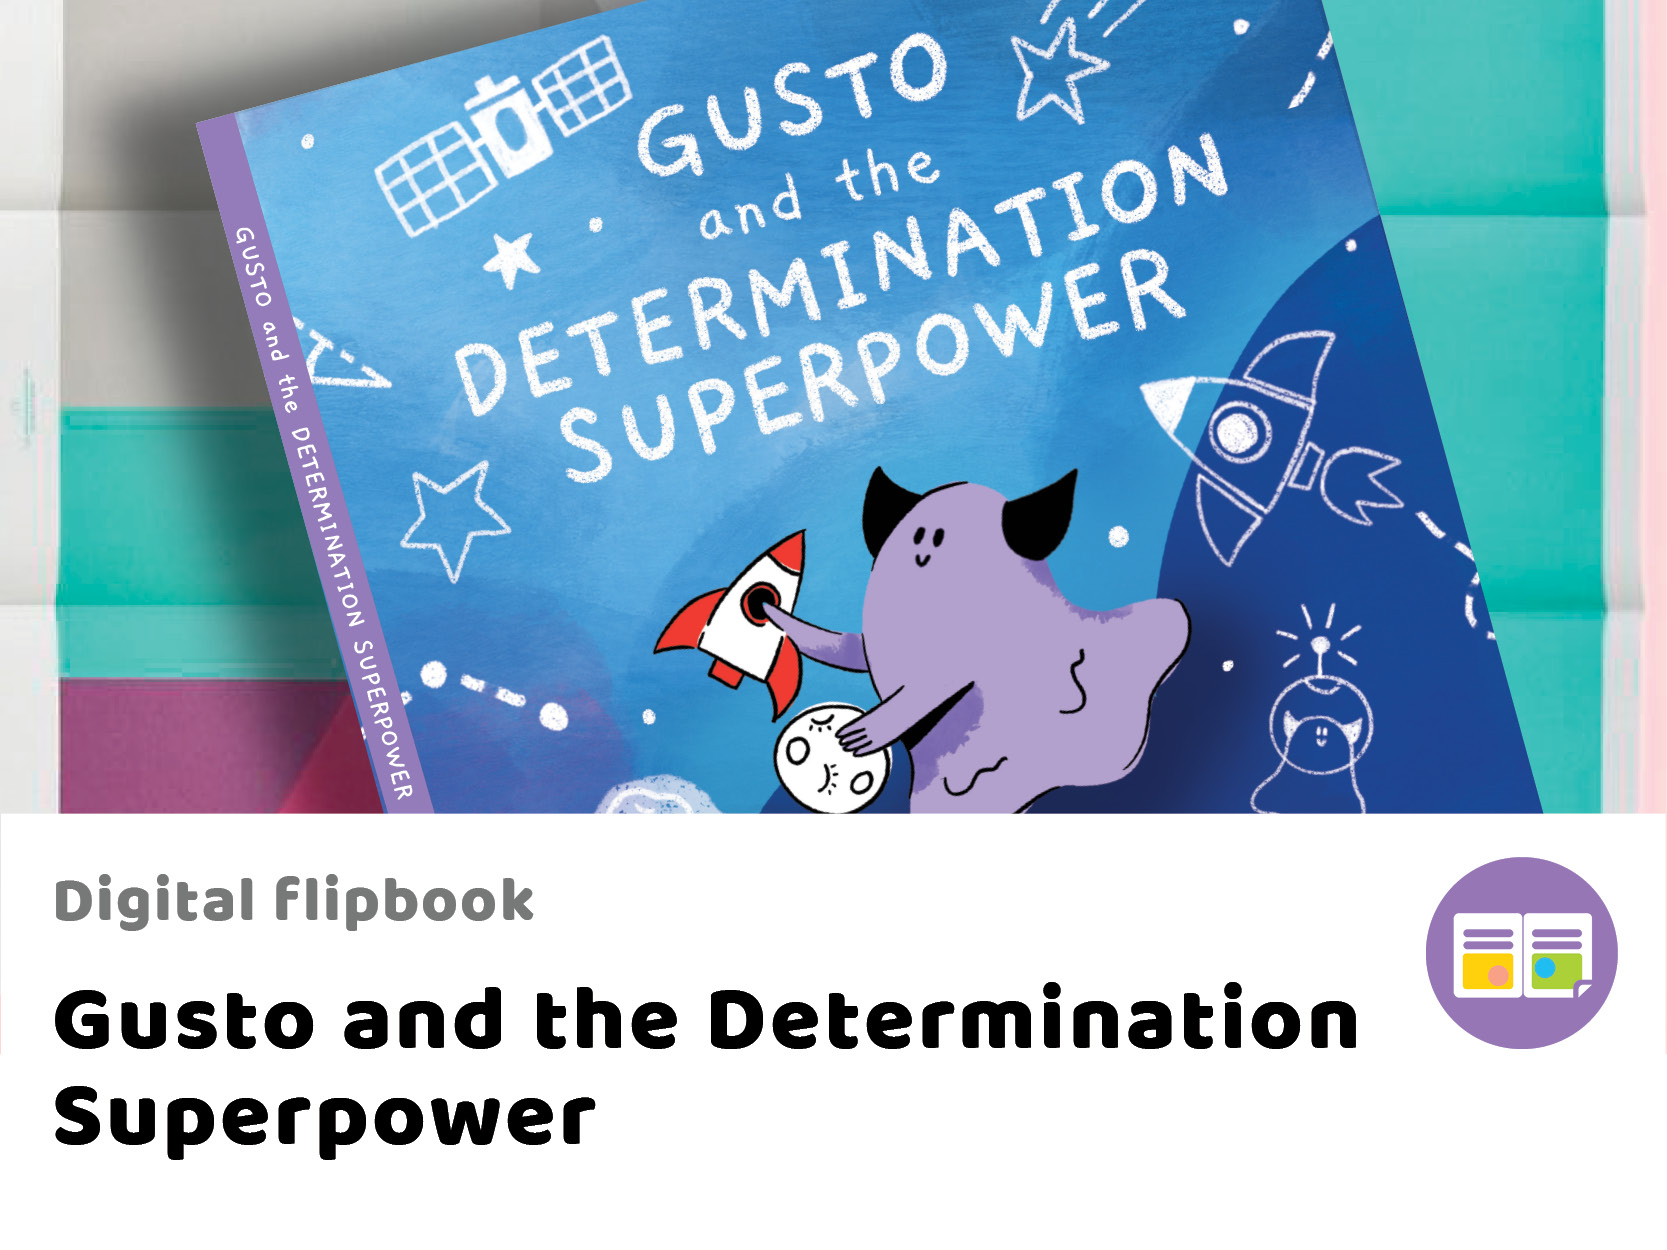 Gusto and the Determination Superpower